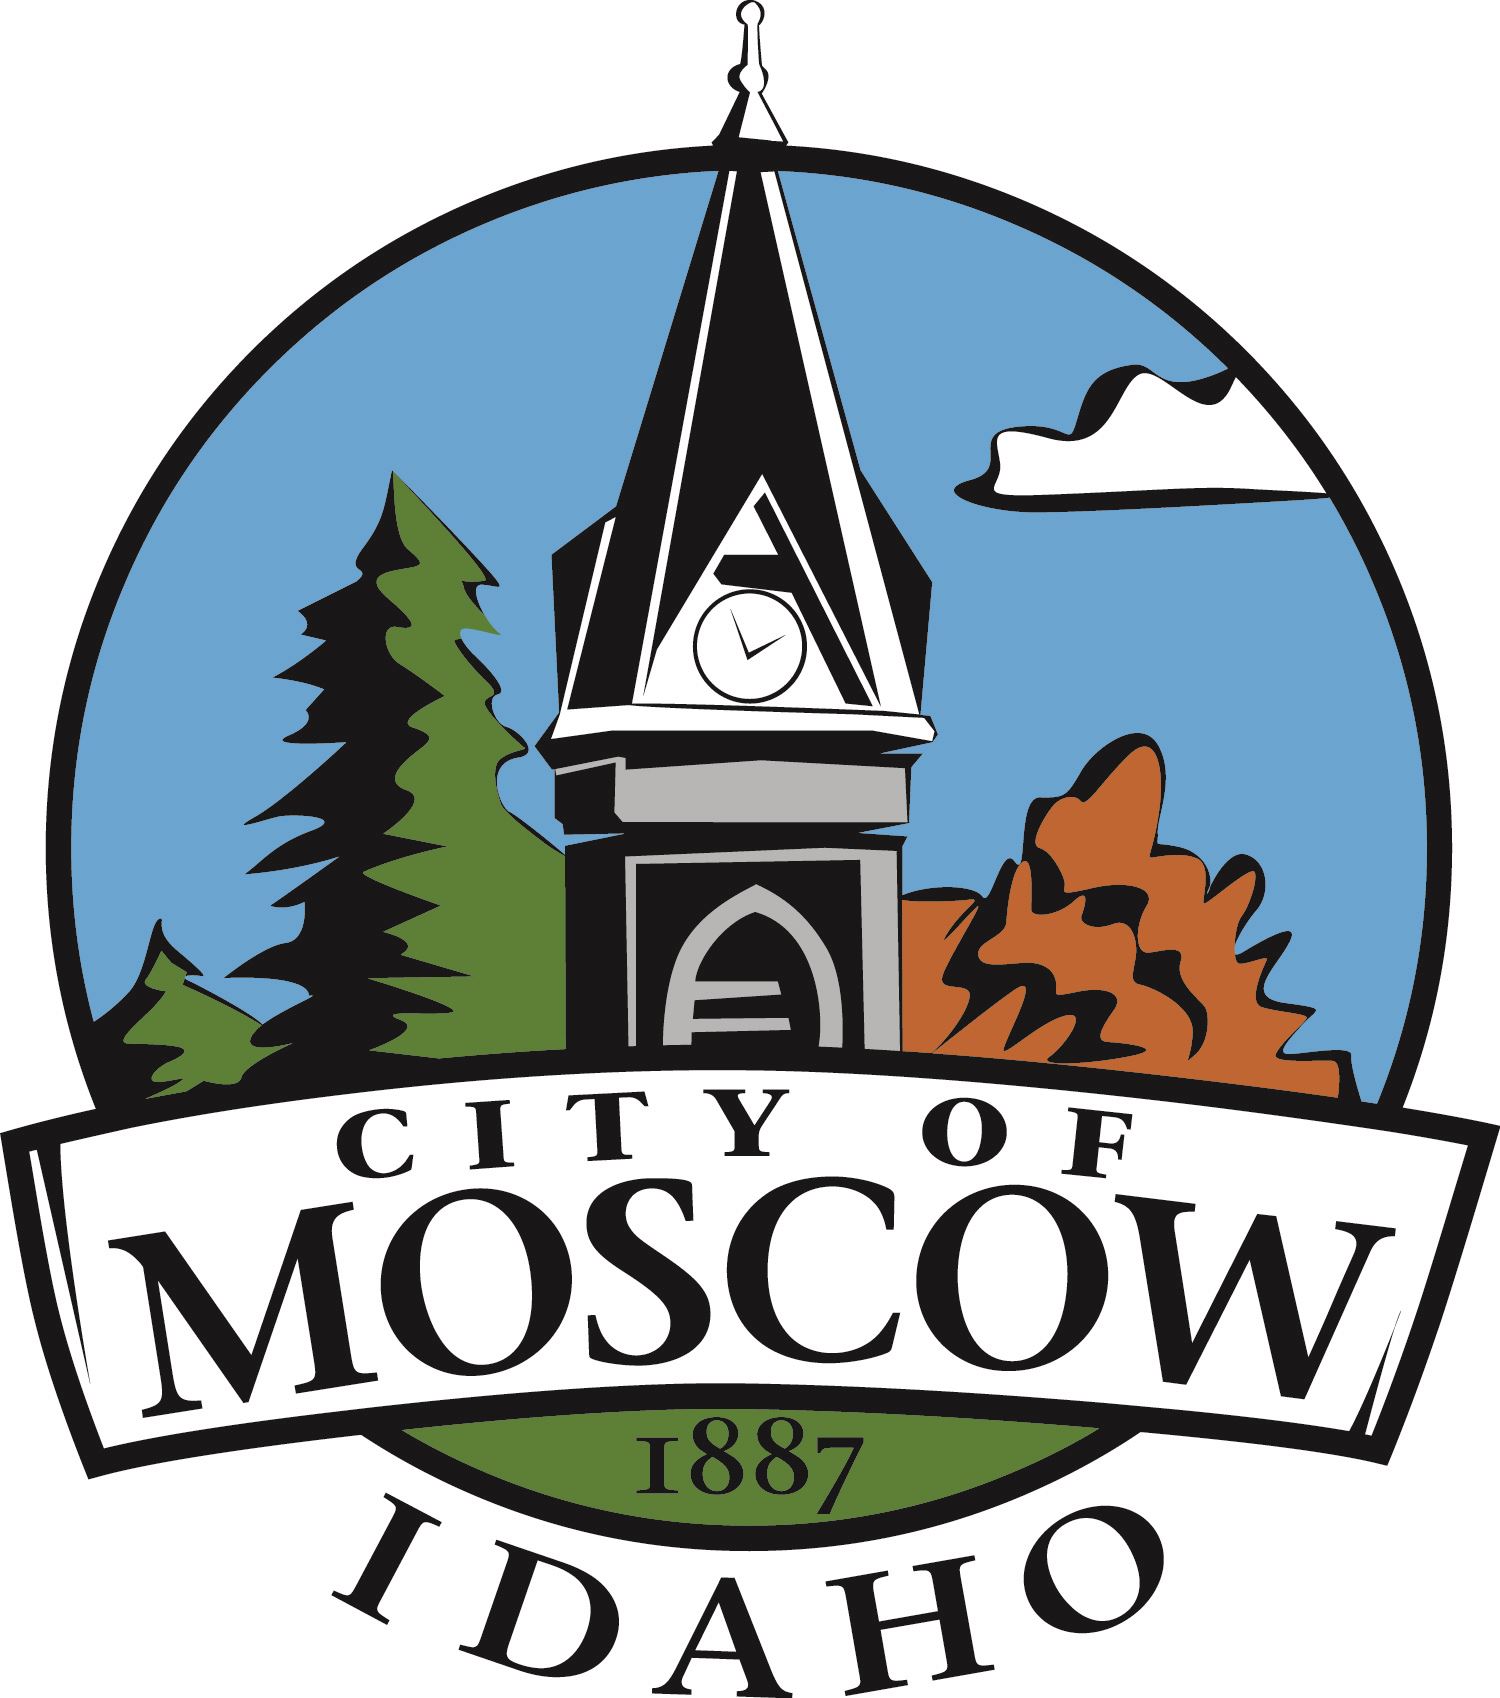 city of moscow logo - circle with blue sky, green pine trees, burnt orange tree, and a bell tower steeple, with a white ribbon with the words city of moscow, 1887, idaho